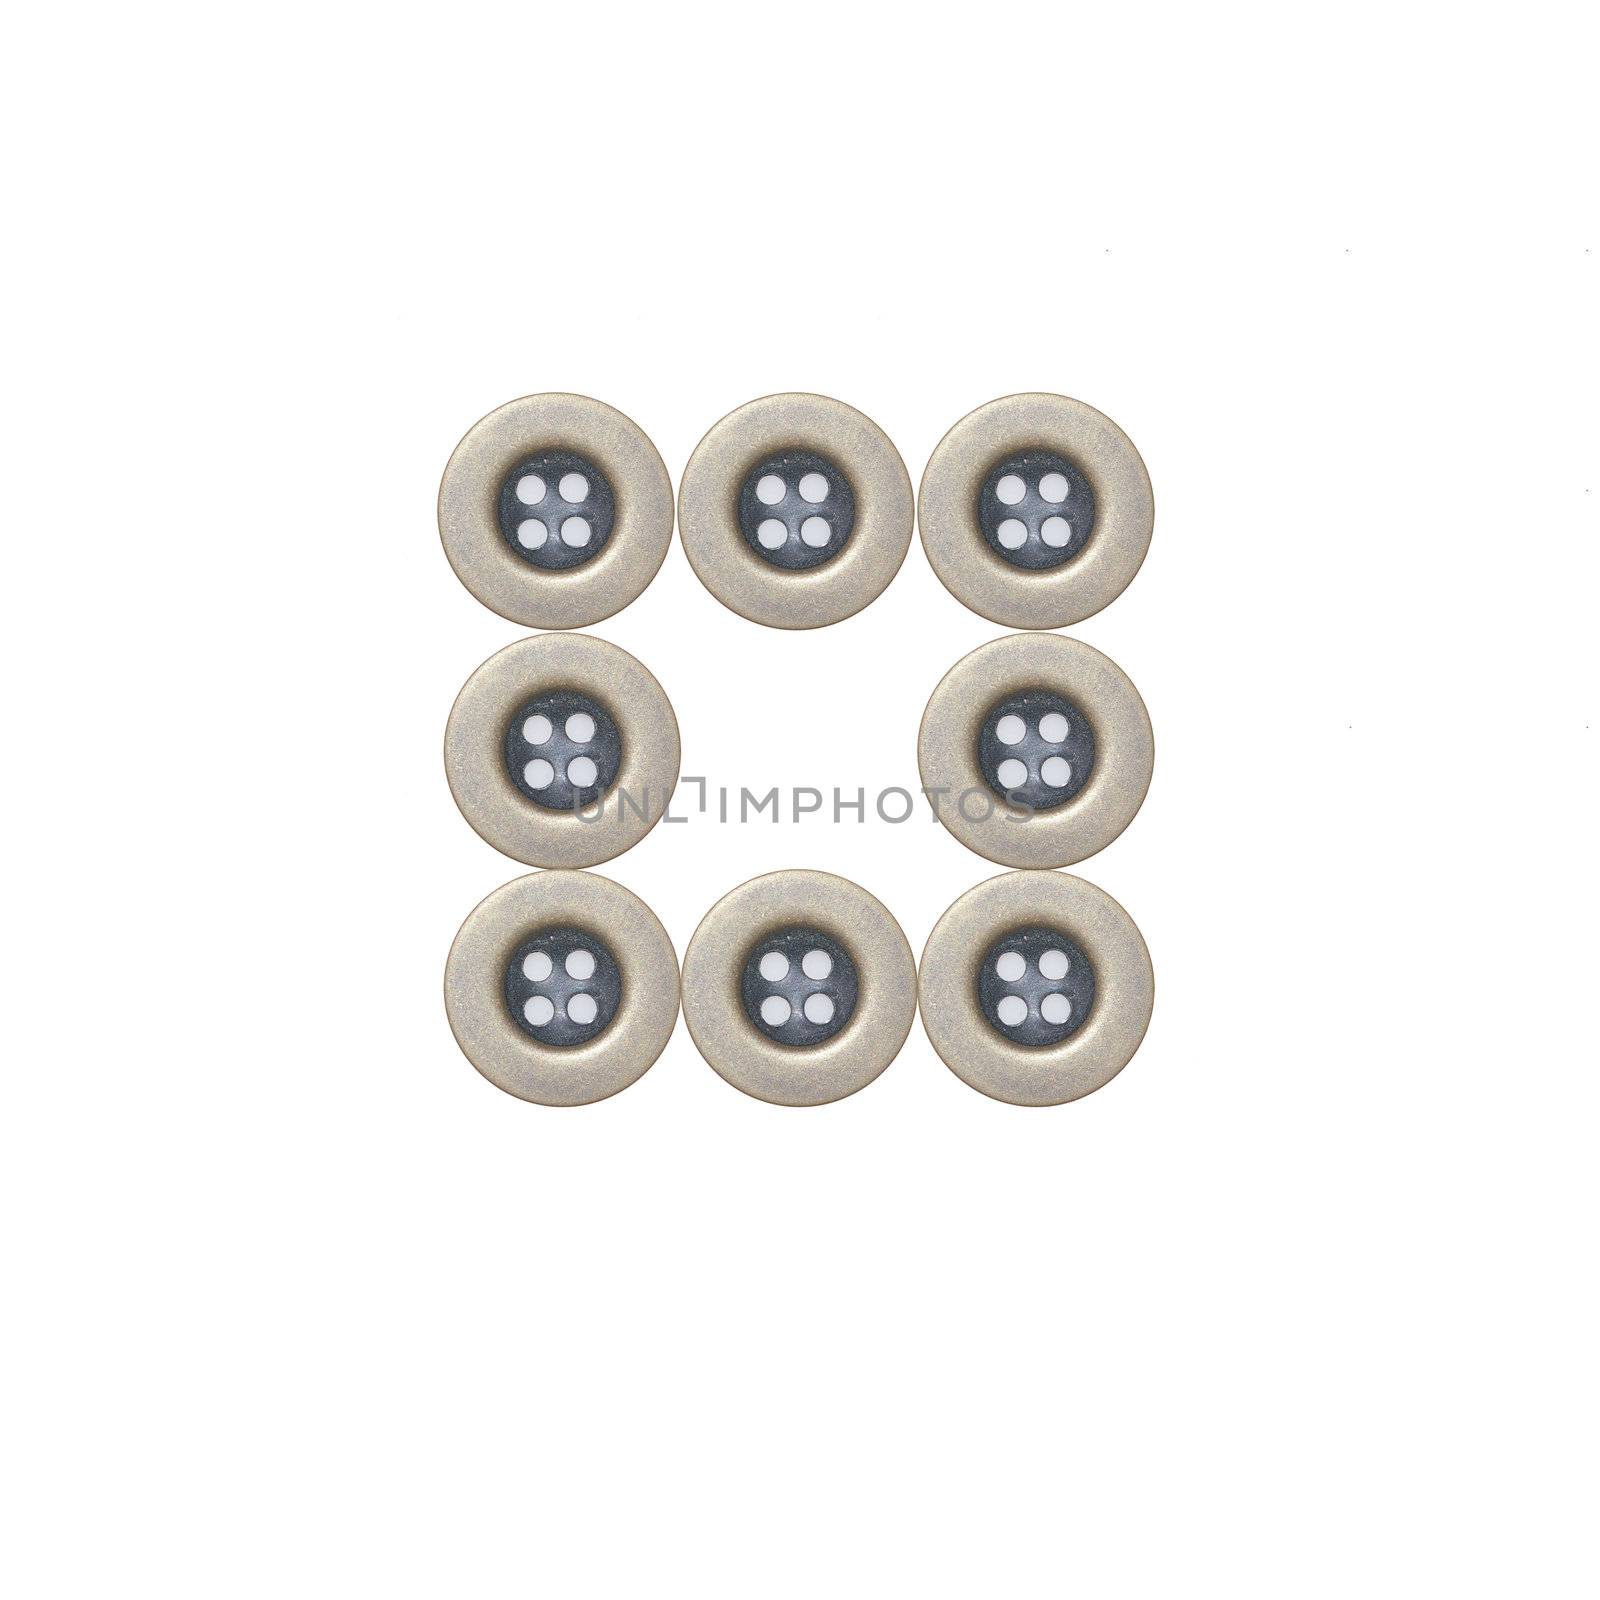 Cloth buttons isolated on white background by kawing921